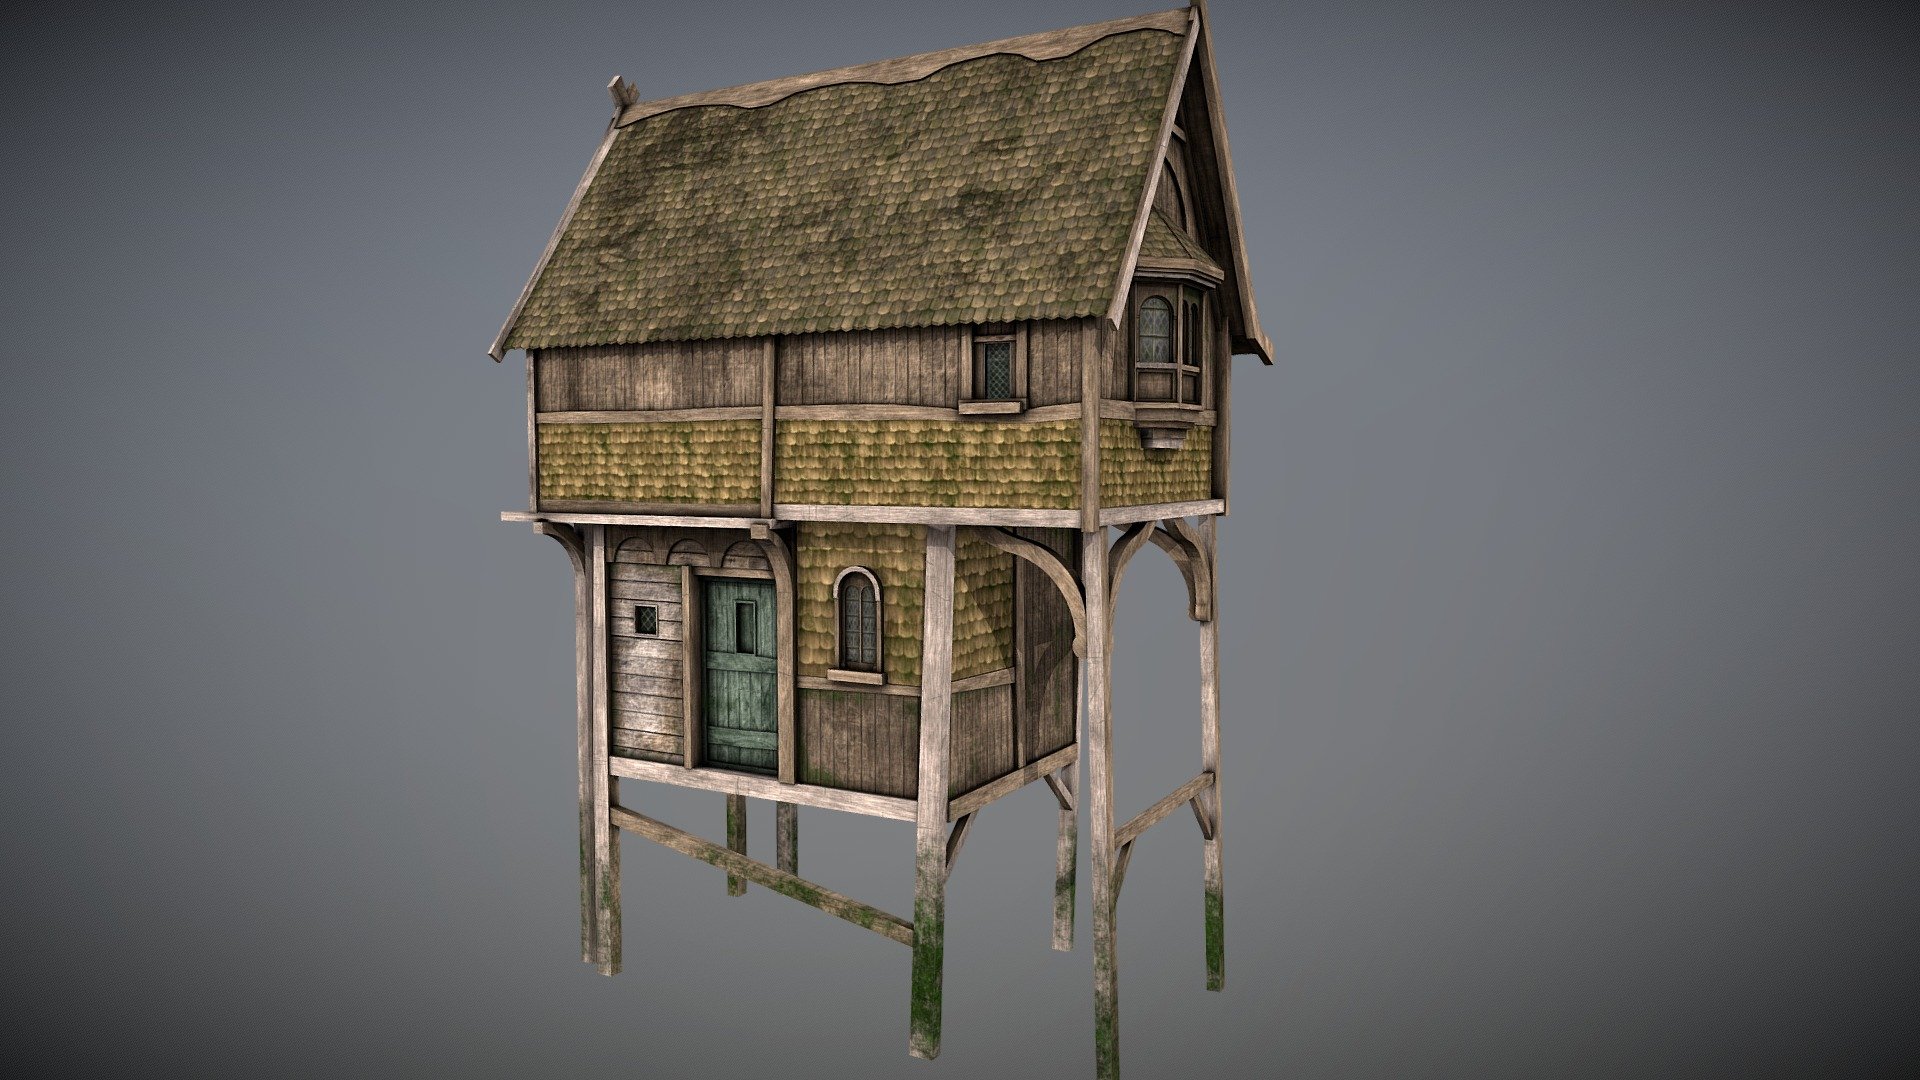 Medieval lake village - House 1 is a medieval stilt house. It includes 5 PBR materials with 4k textures 3d model